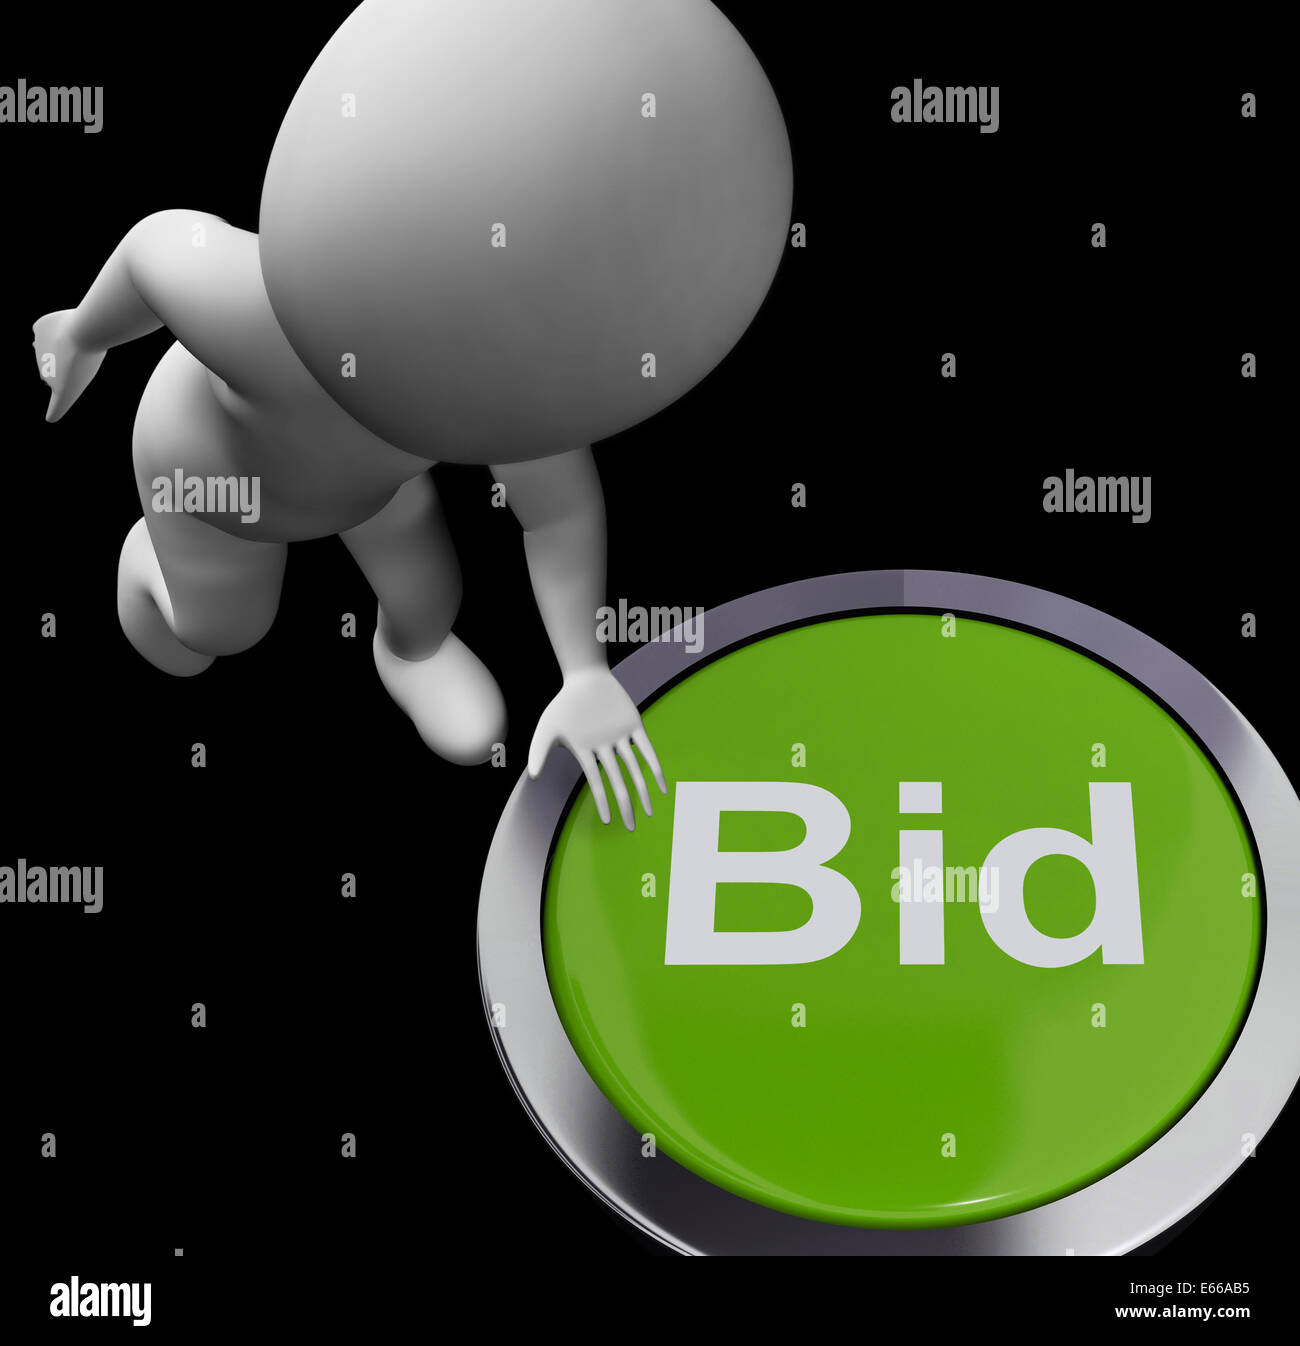 Bid Button Showing Auction Buying And Selling Stock Photo